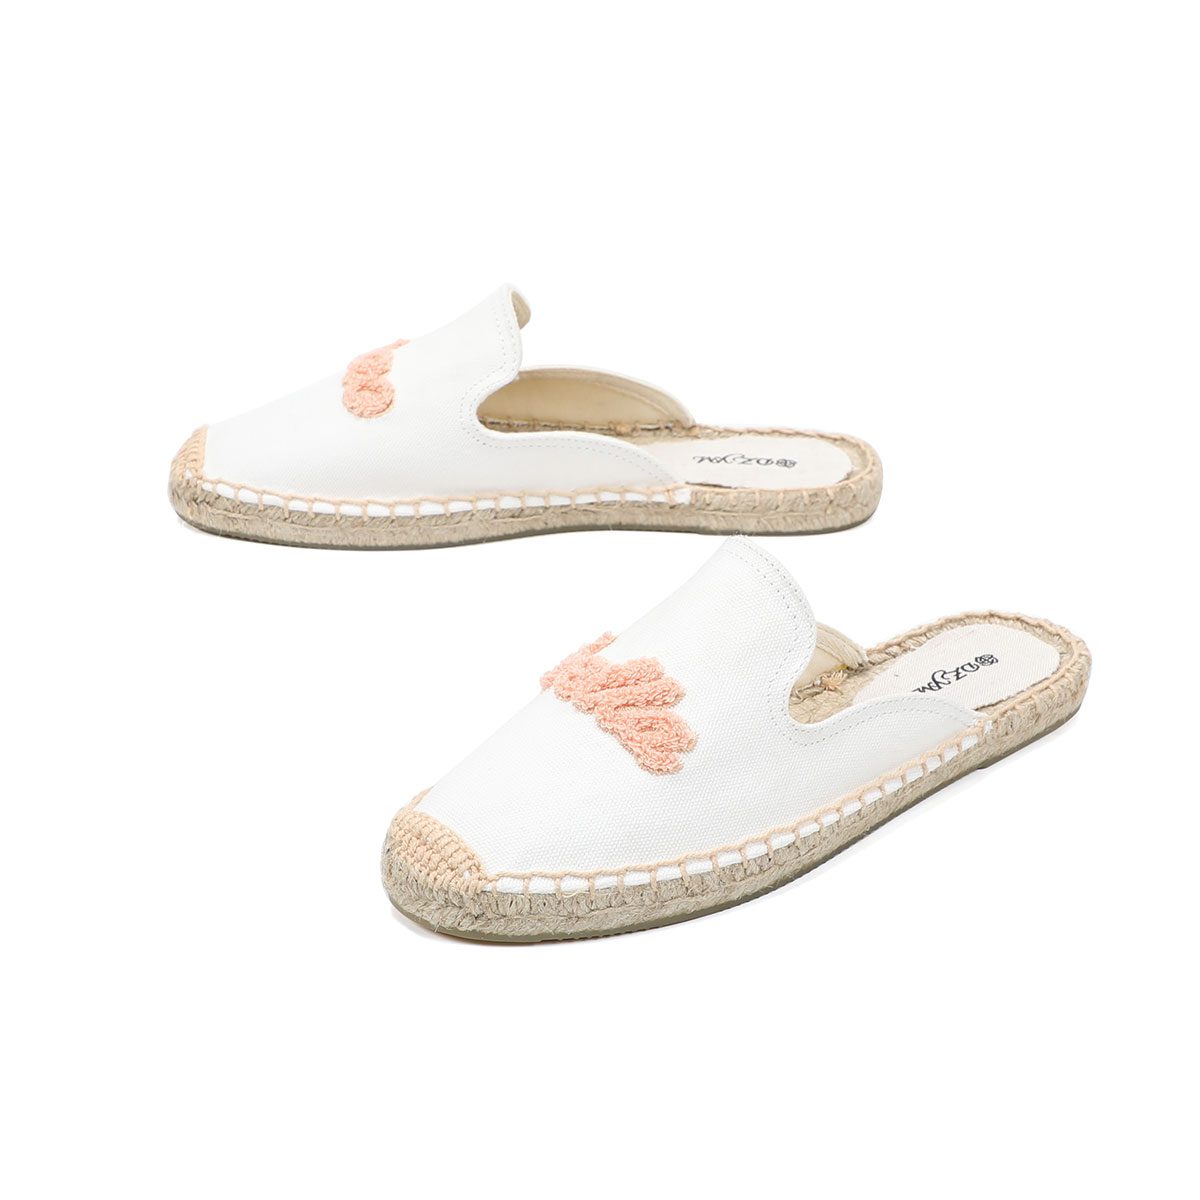 Ladies Summer Flat Breathable Espadrille Slippers Fashion Casual Simple Beach Sandals Ladies Muller Shoes Shallow Mouth Slip On